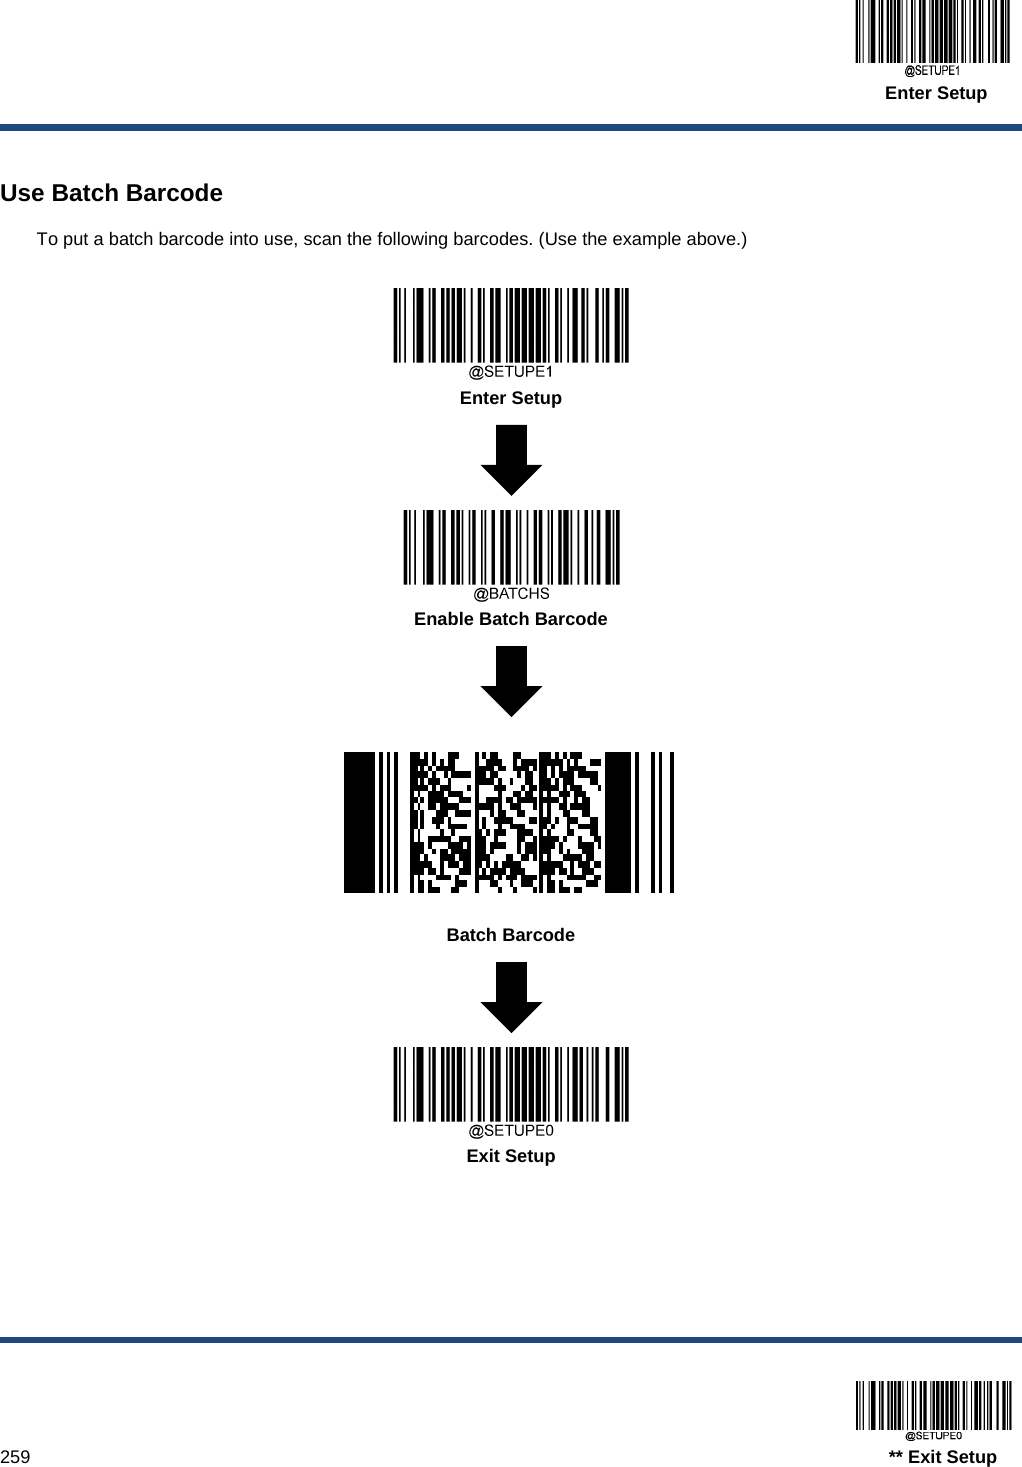  Enter Setup  259                                                                                   ** Exit Setup  Use Batch Barcode To put a batch barcode into use, scan the following barcodes. (Use the example above.)   Enter Setup   Enable Batch Barcode   Batch Barcode   Exit Setup   